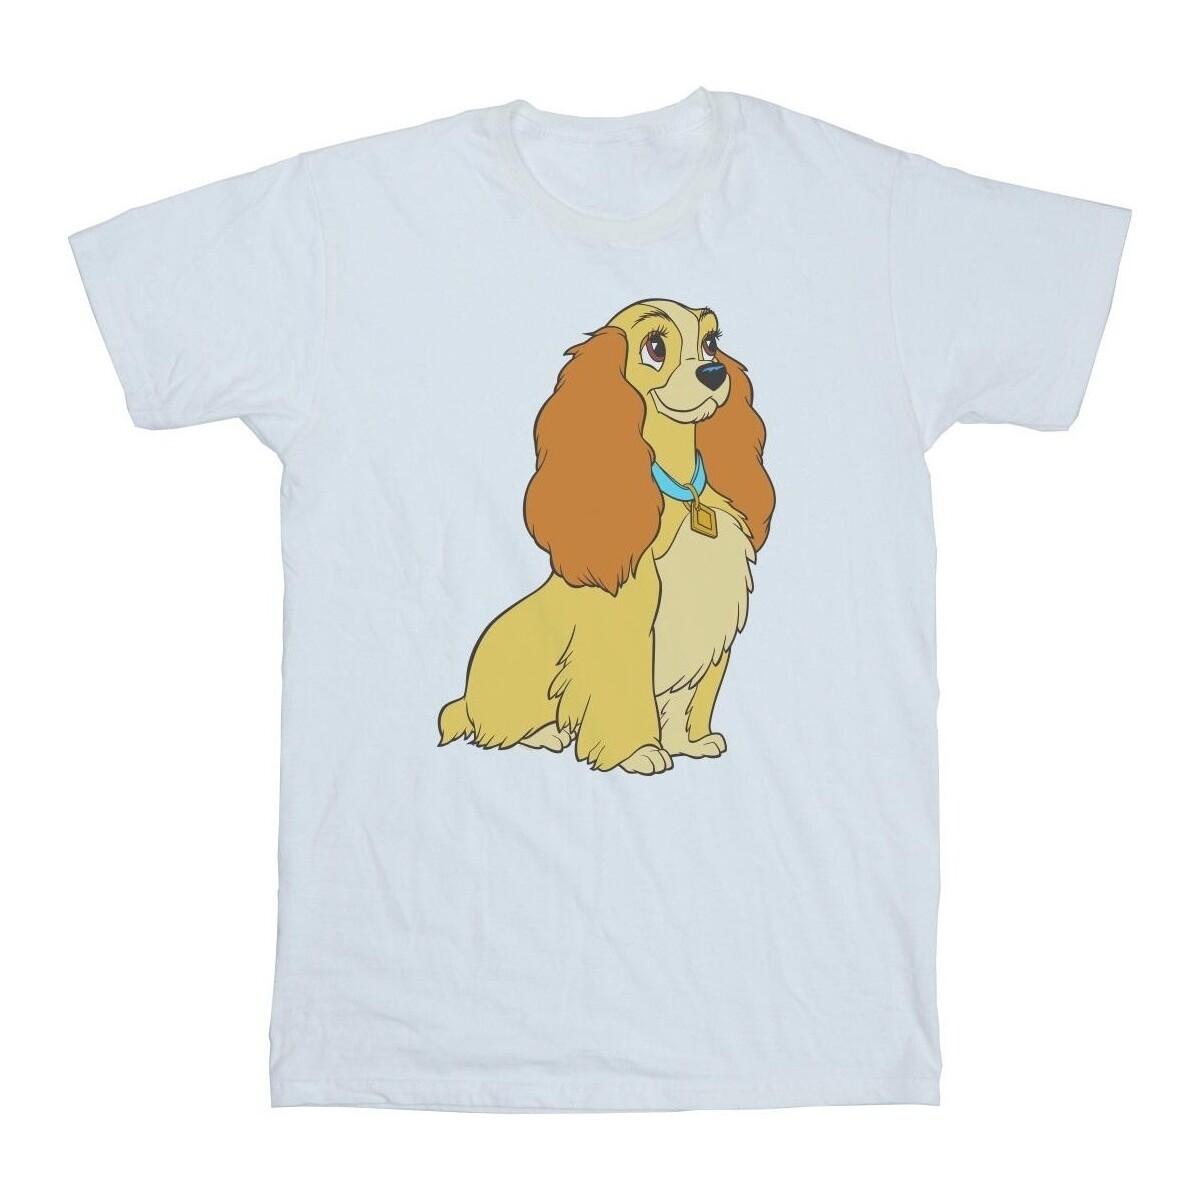 Vêtements Homme T-shirts manches longues Disney Lady And The Tramp Lady Spaghetti Heart Blanc